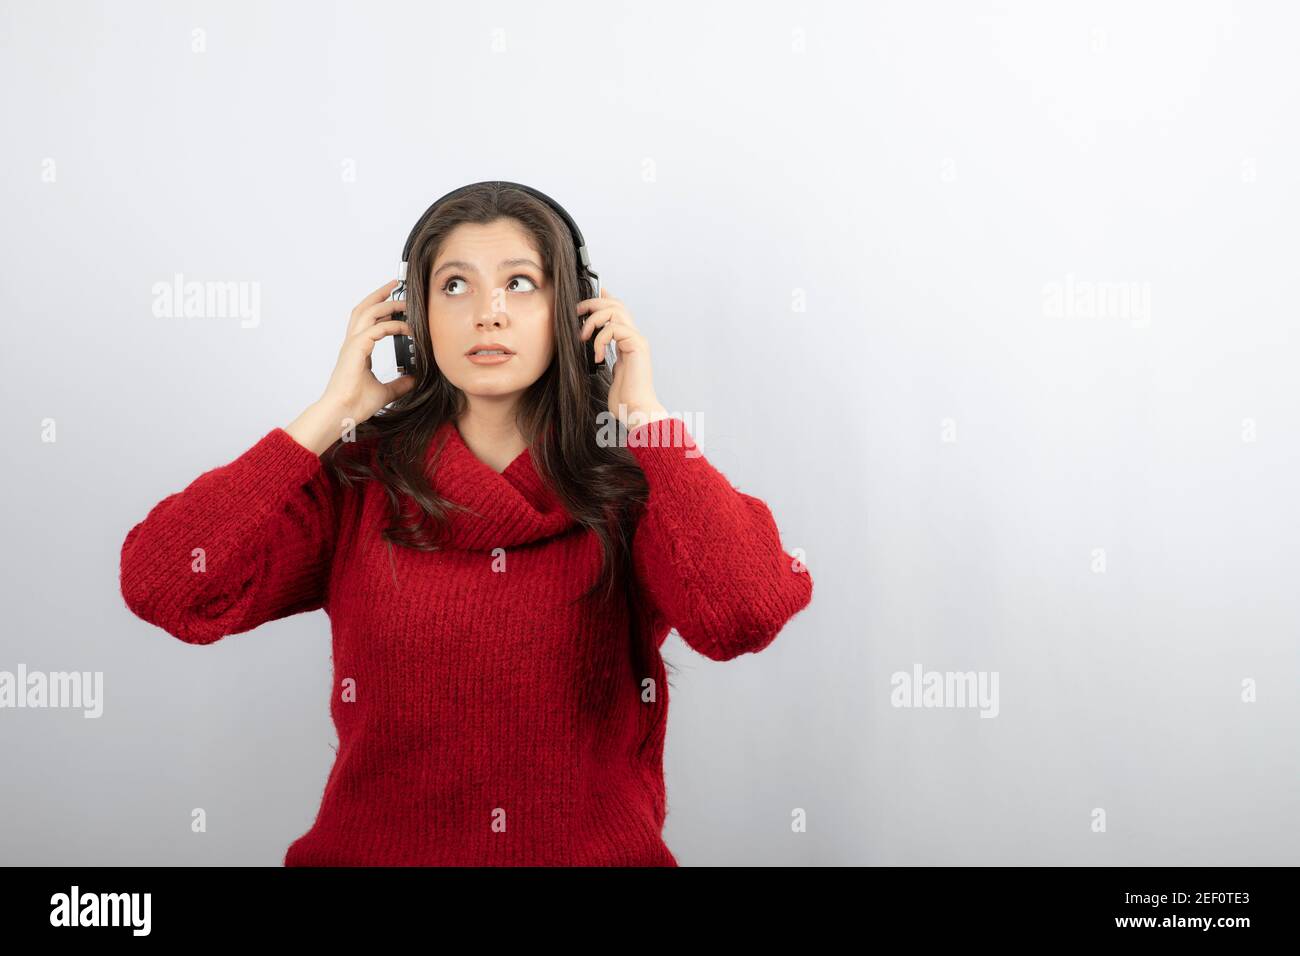 Photo of a young woman in red sweater wearing headphones Stock Photo